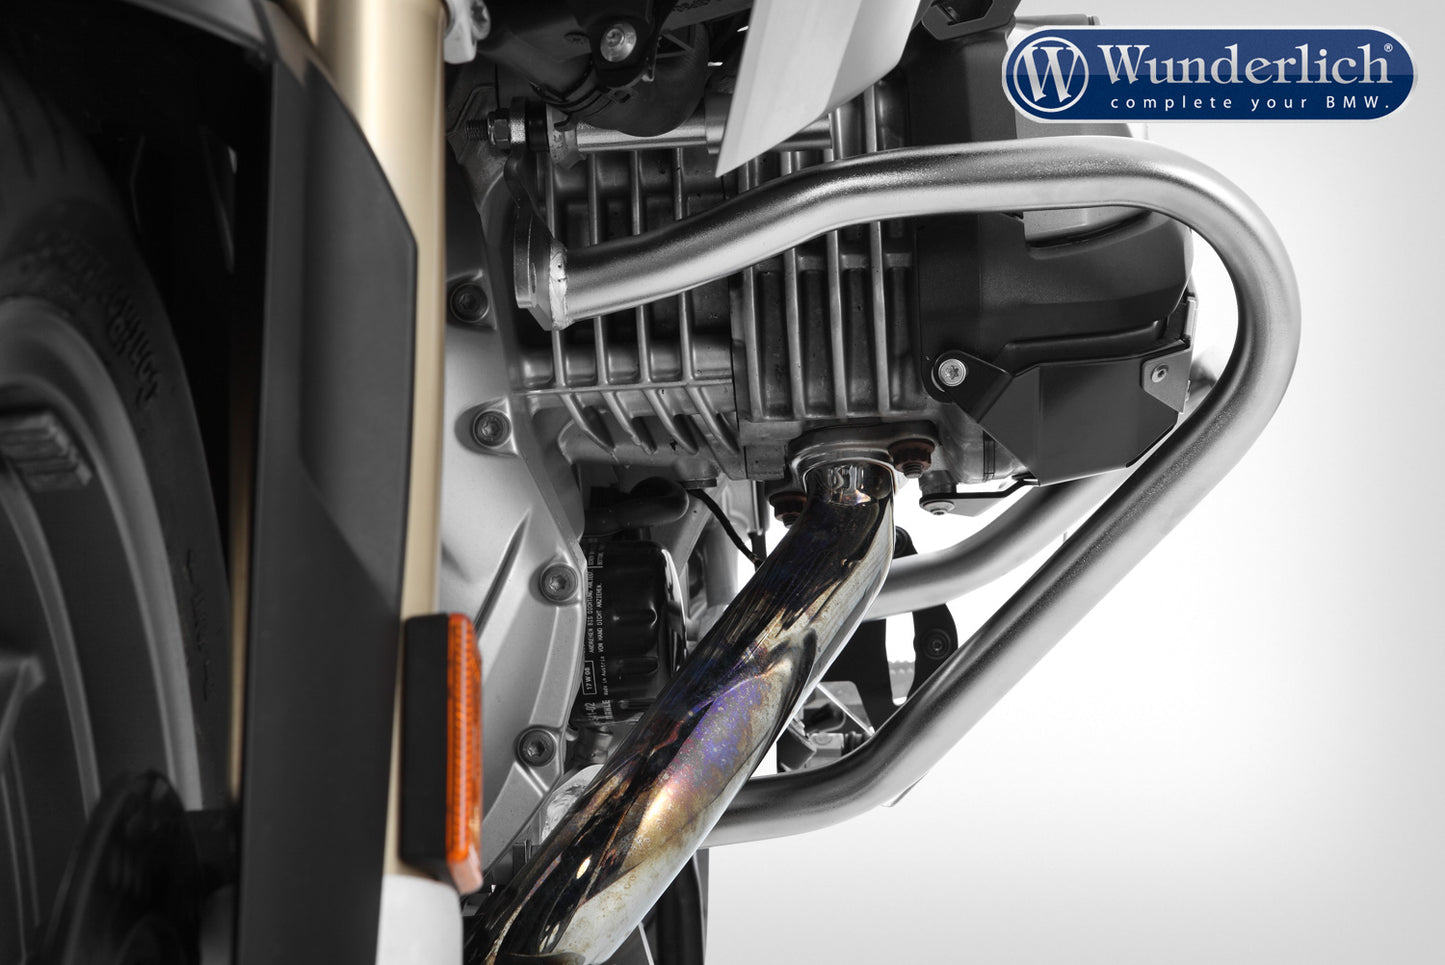 Wunderlich engine protection bar - stainless steel